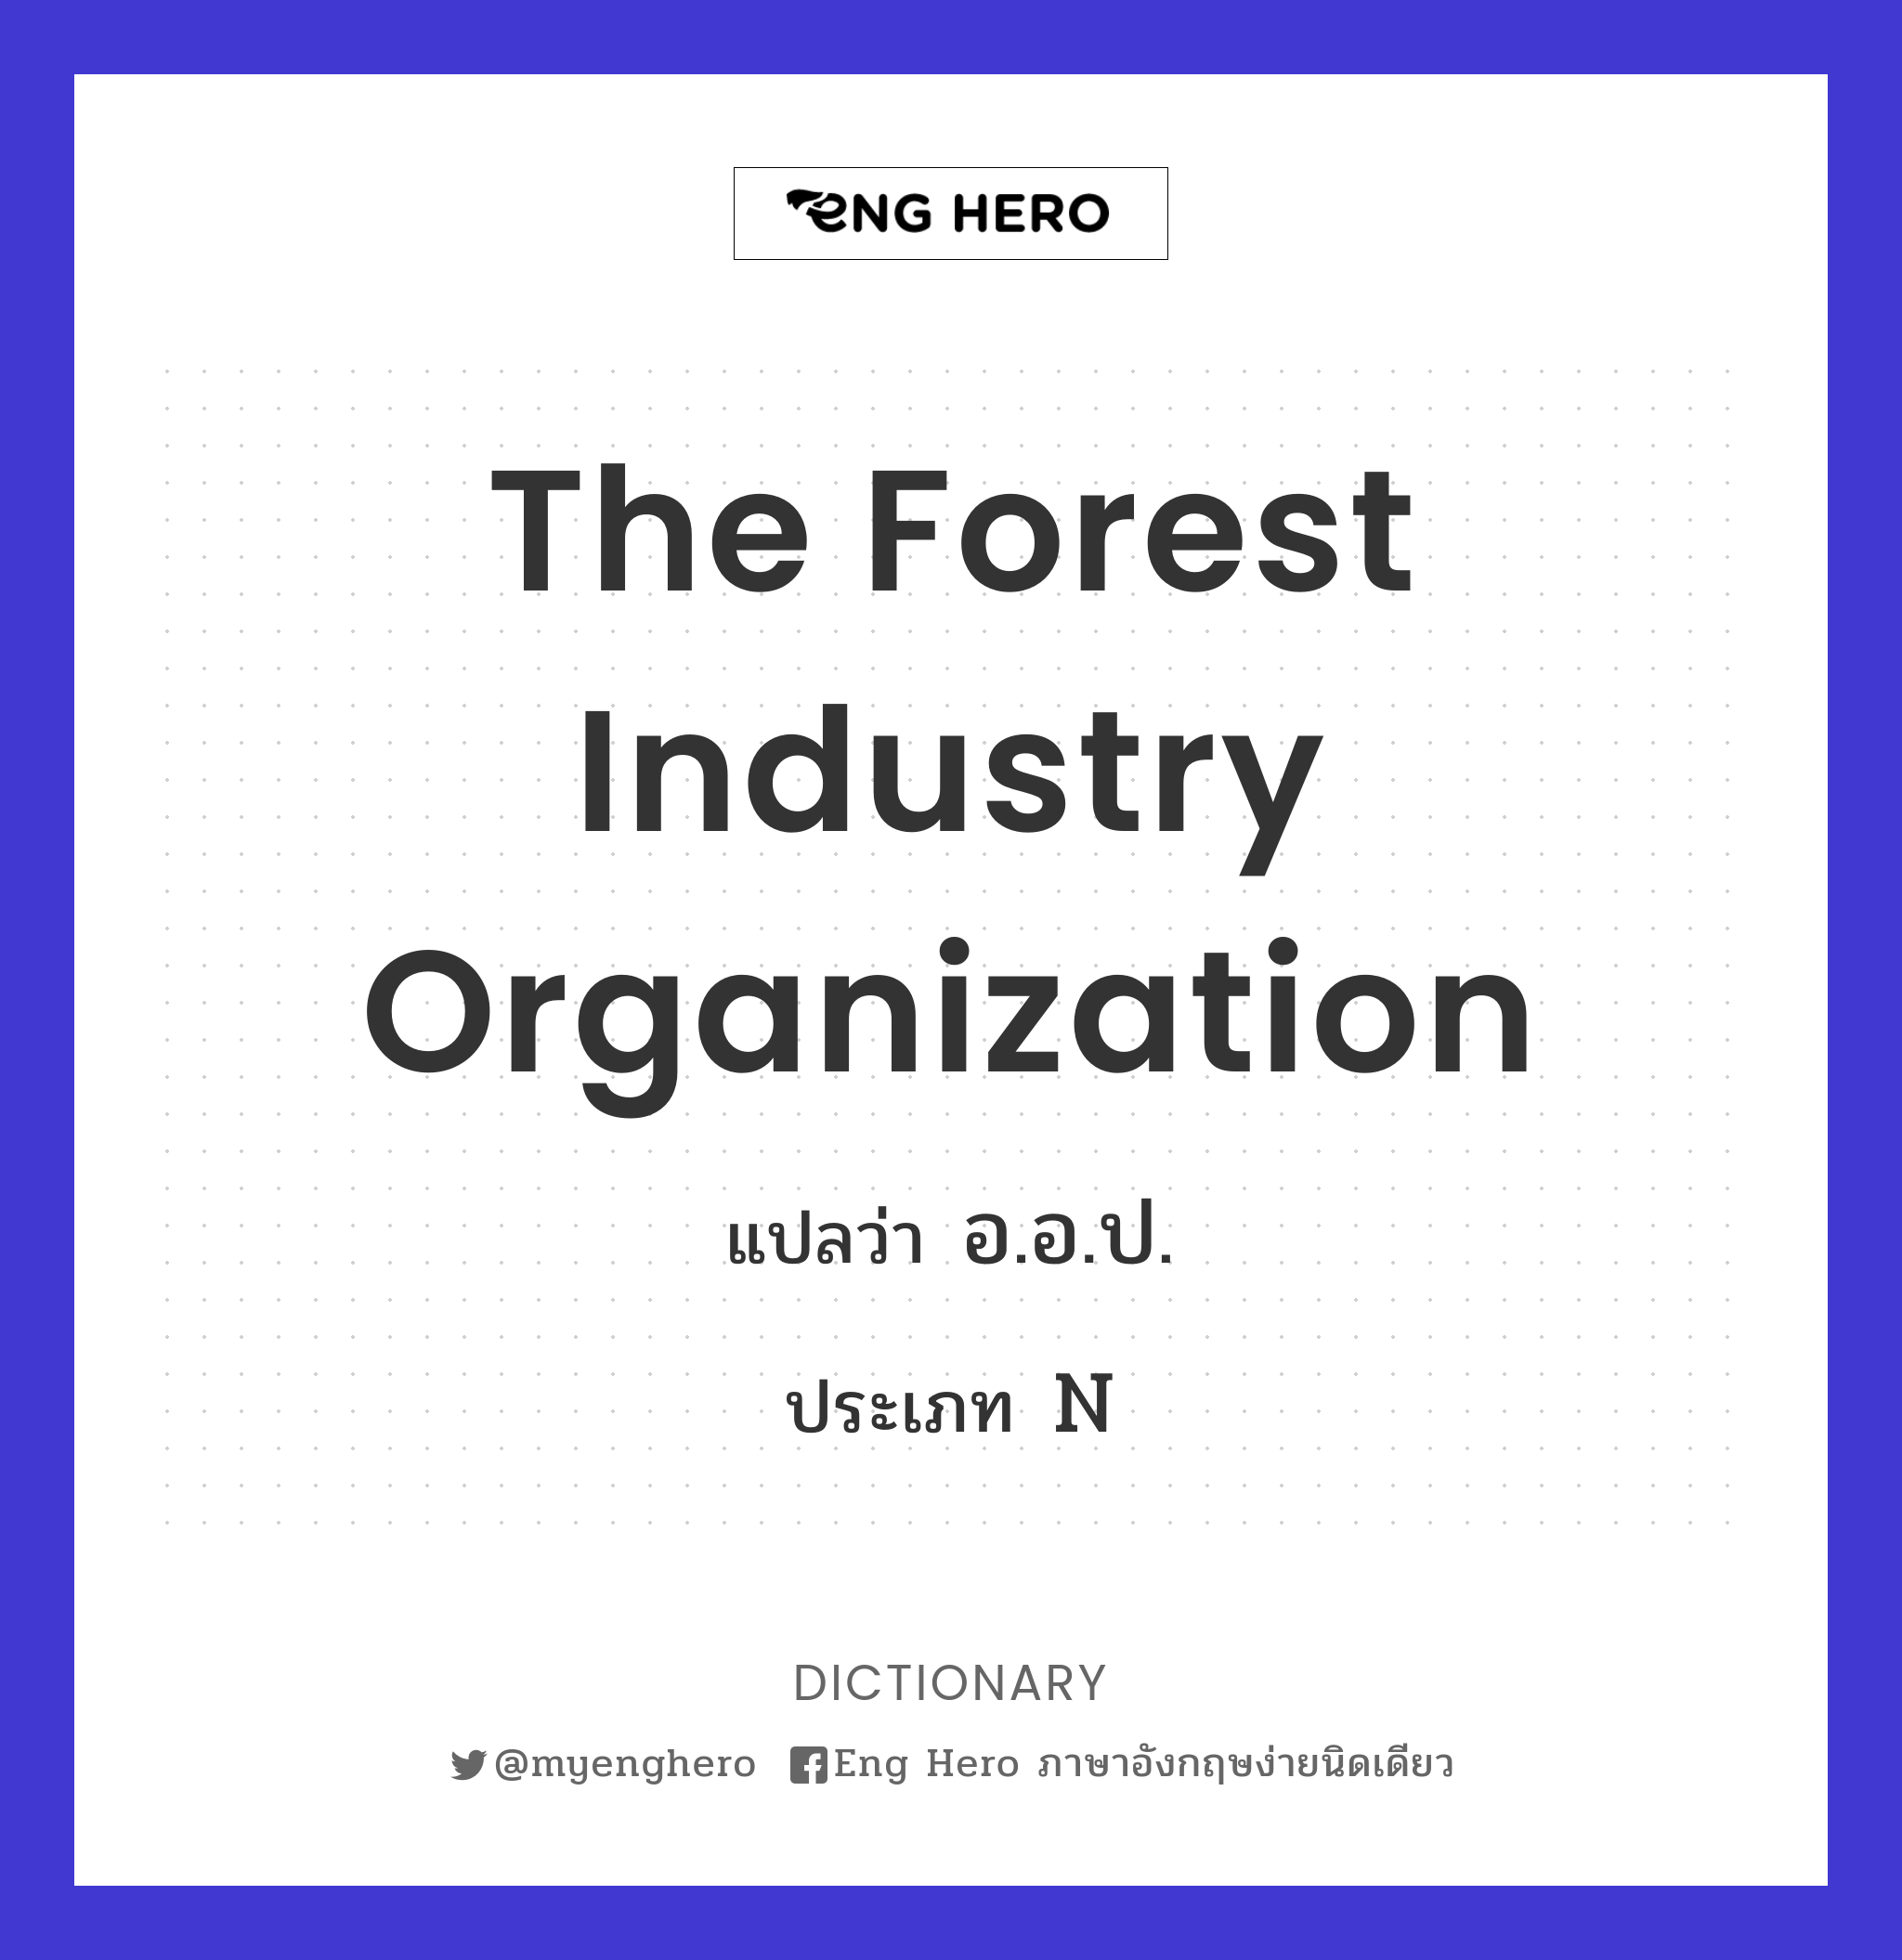 The Forest Industry Organization